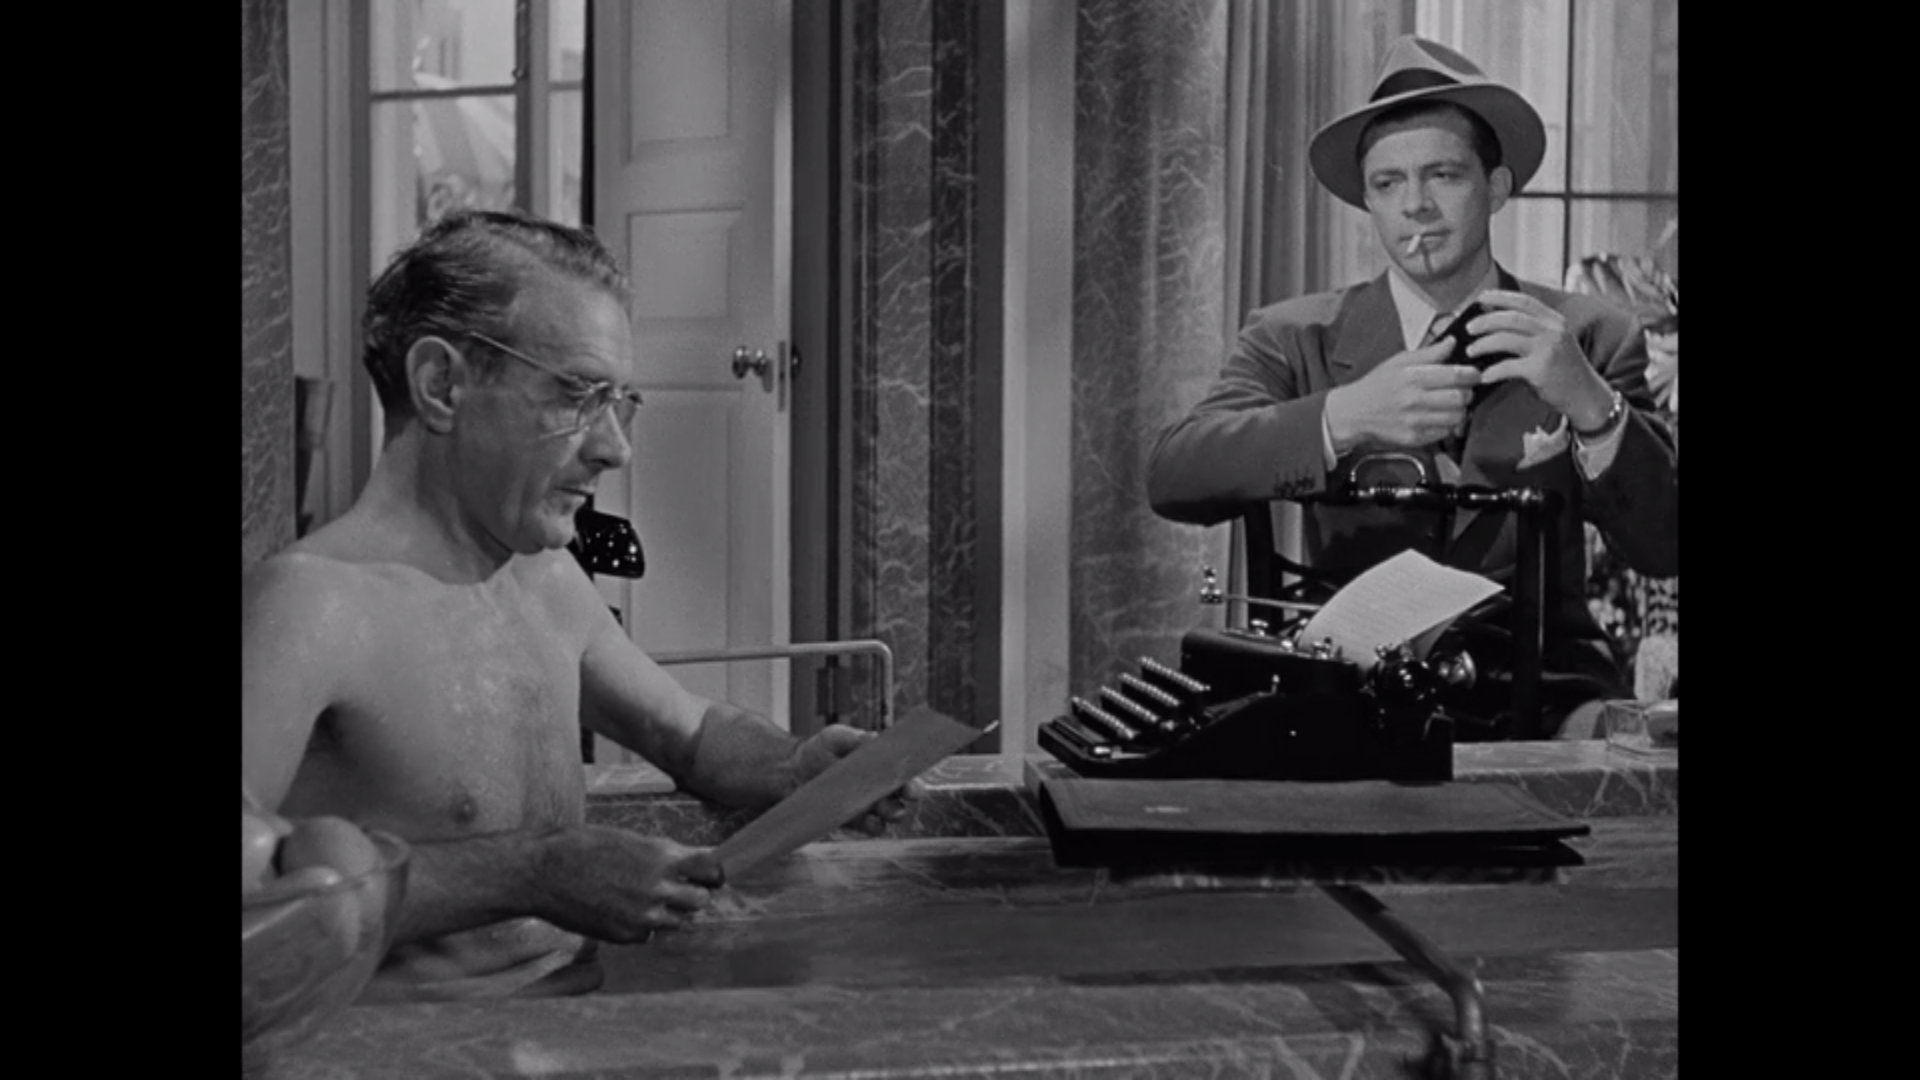 A man in a fedora smokes a cigarette, facing a man in a bathtub who is using a typewriter.